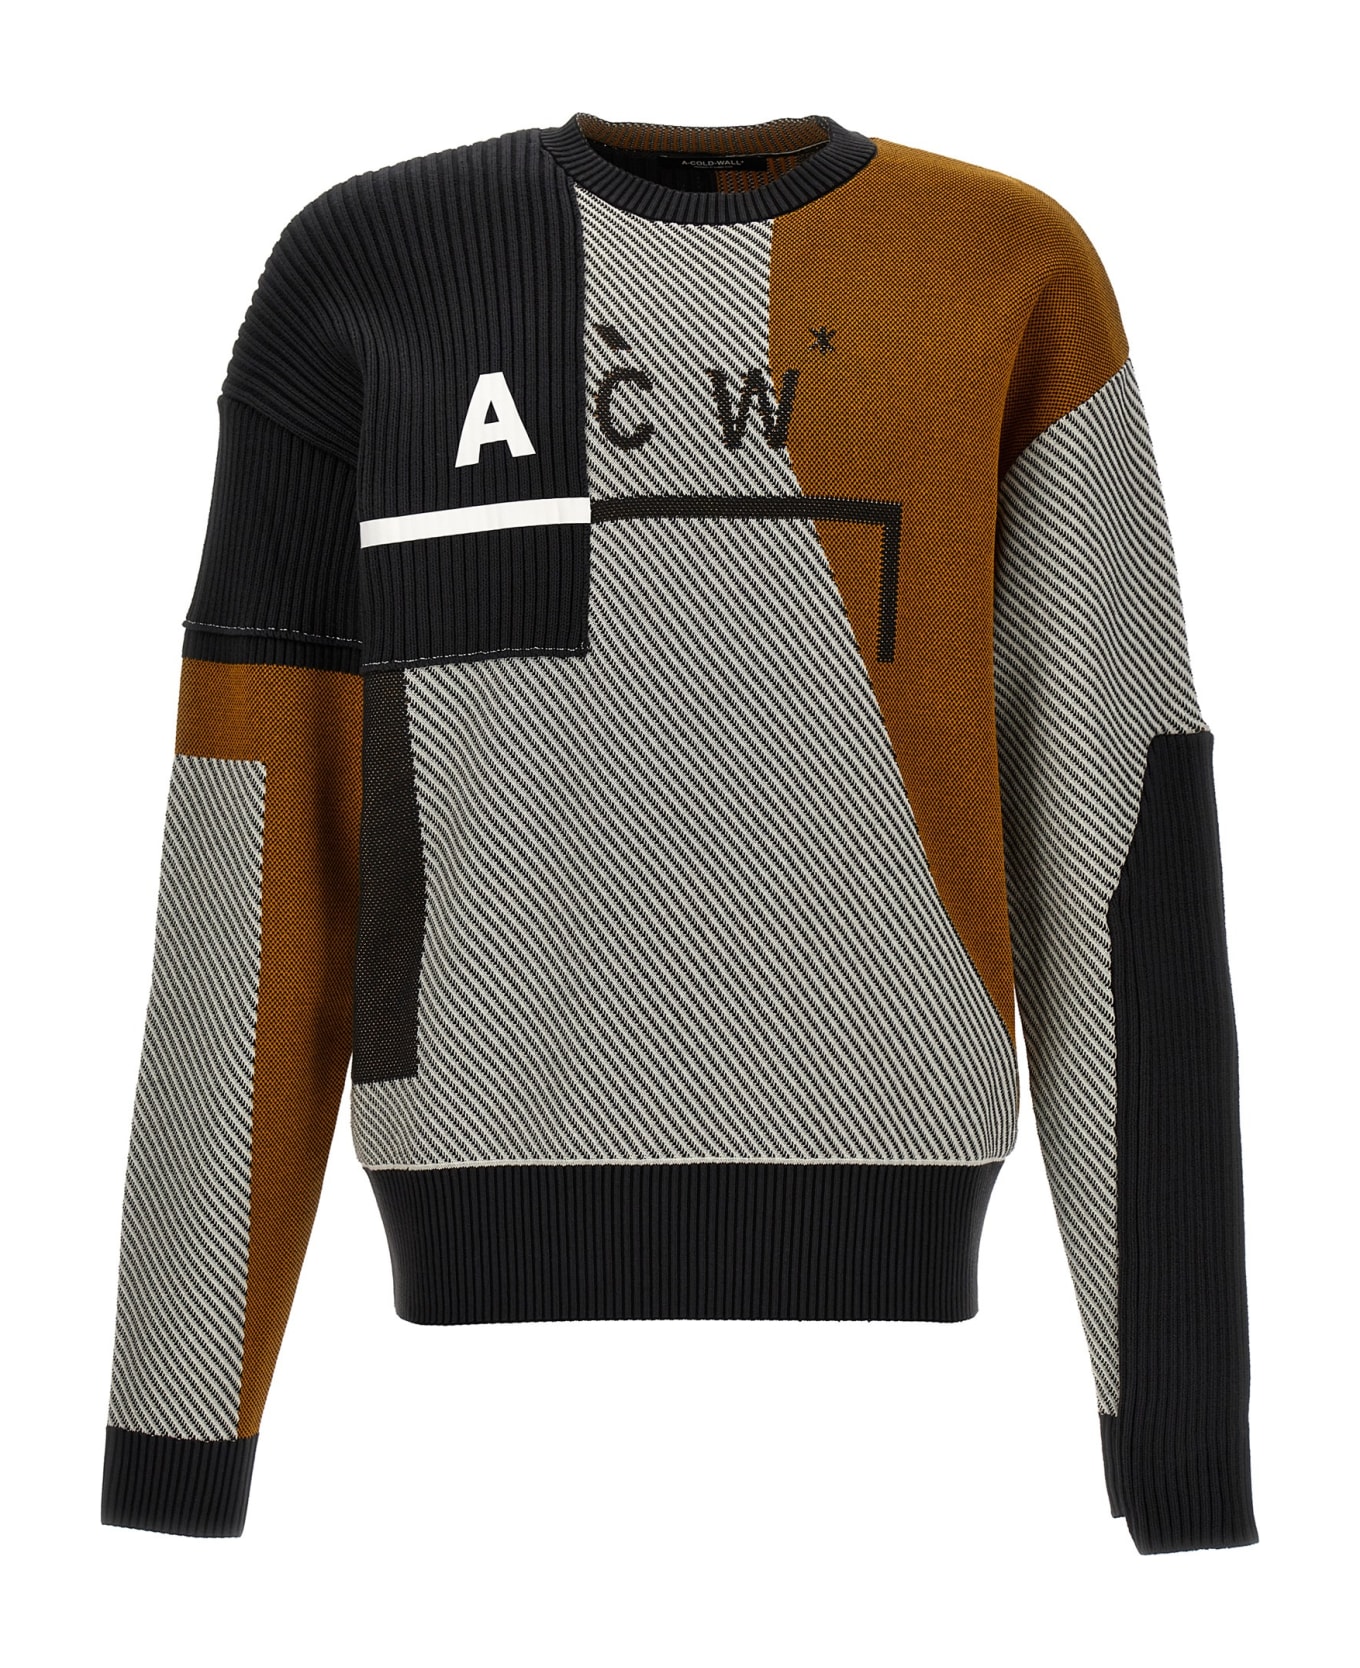 A-COLD-WALL 'geometric' Sweater - Multicolor ニットウェア